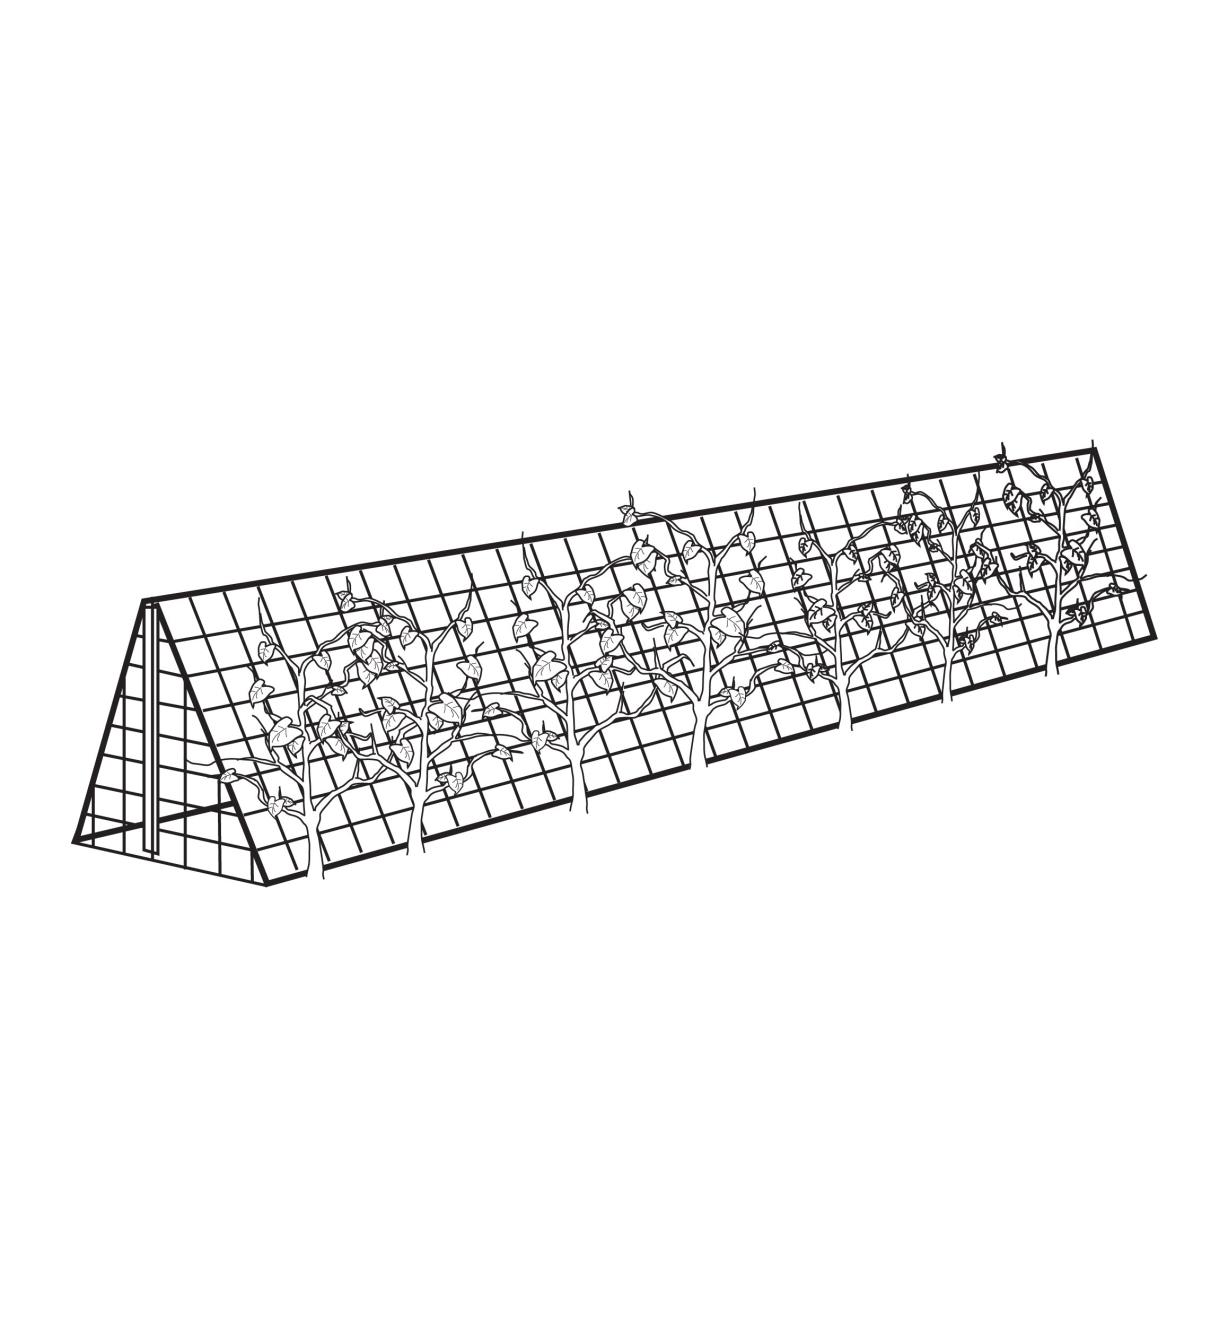 Illustrated example of triangular trellis over a garden row, made with Garden Netting